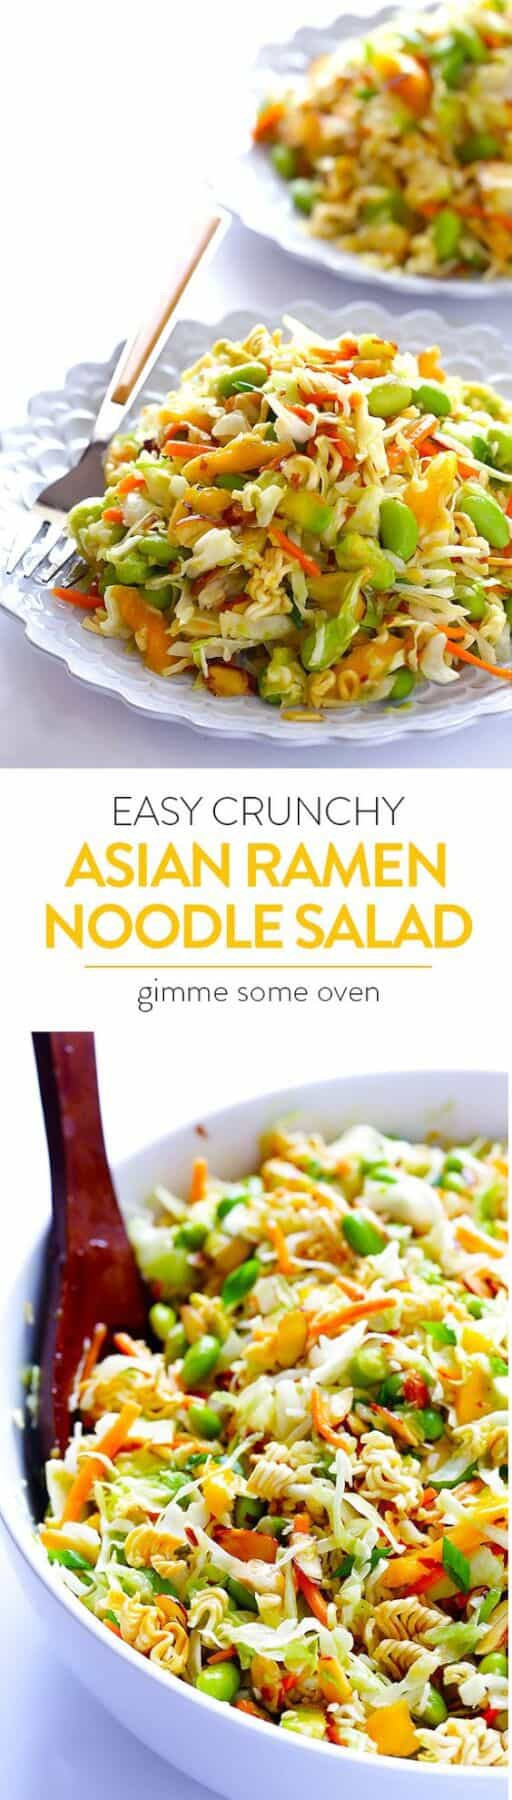 Chinese Ramen Noodles
 The 25 Most Pinned Chinese Recipes on Pinterest